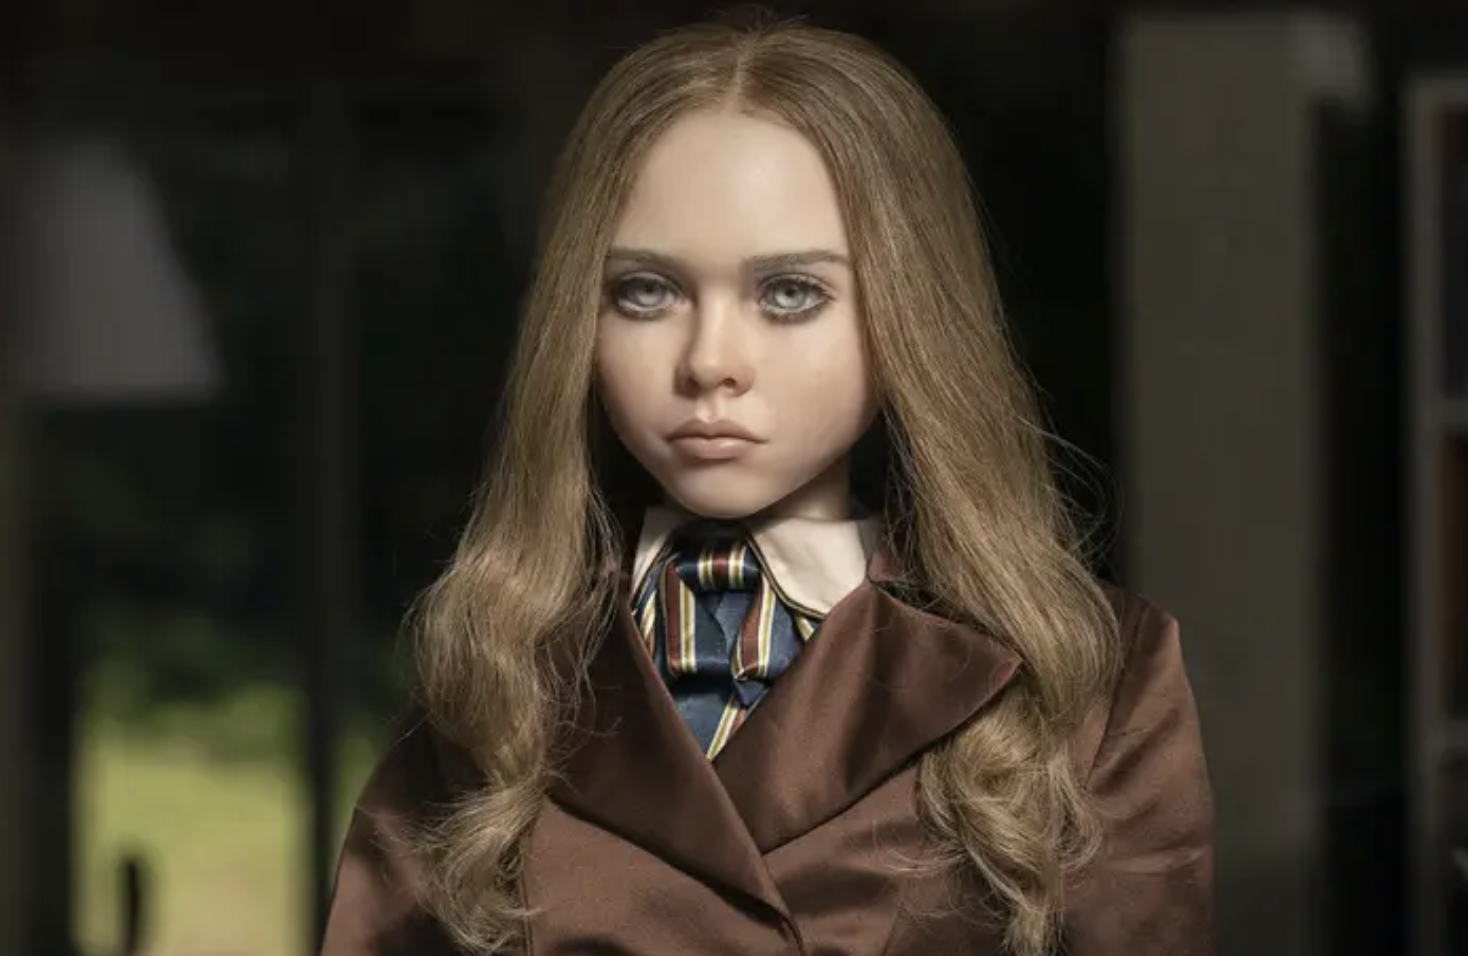 A realistiic ish looking M3GAN doll stares ahead wearing a brown suit